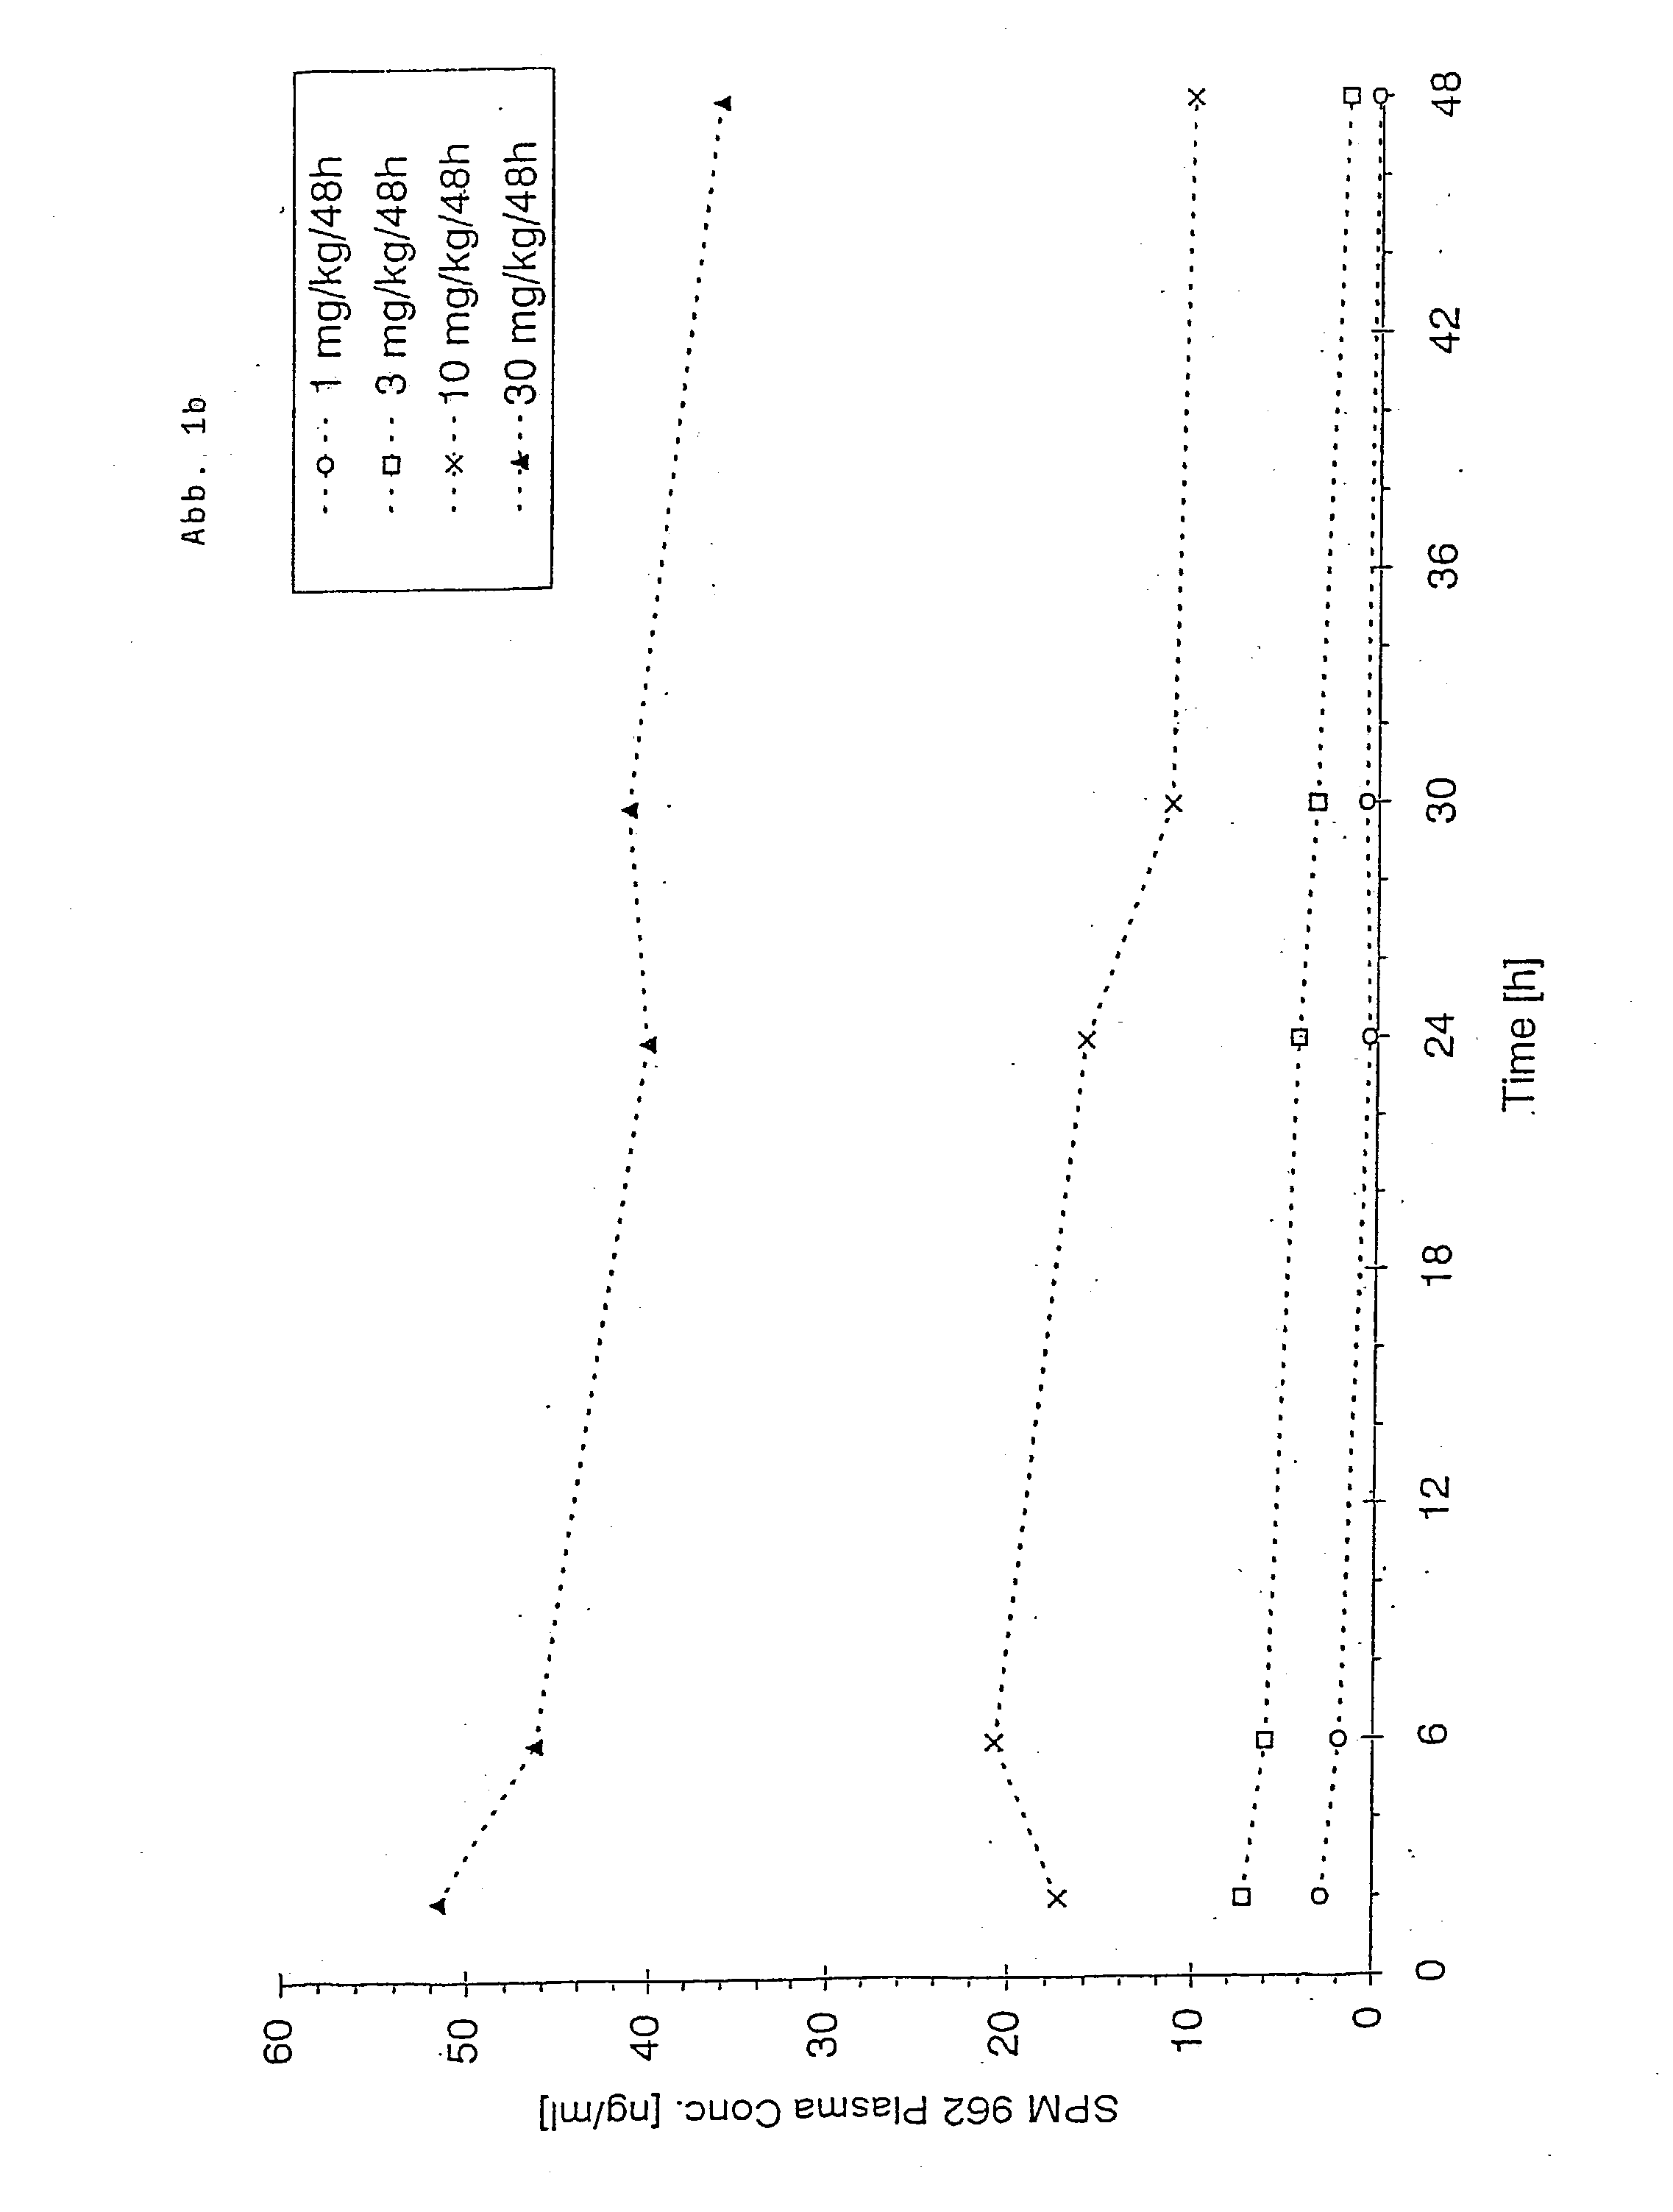 Novel pharmaceutical compositions administering n-0923